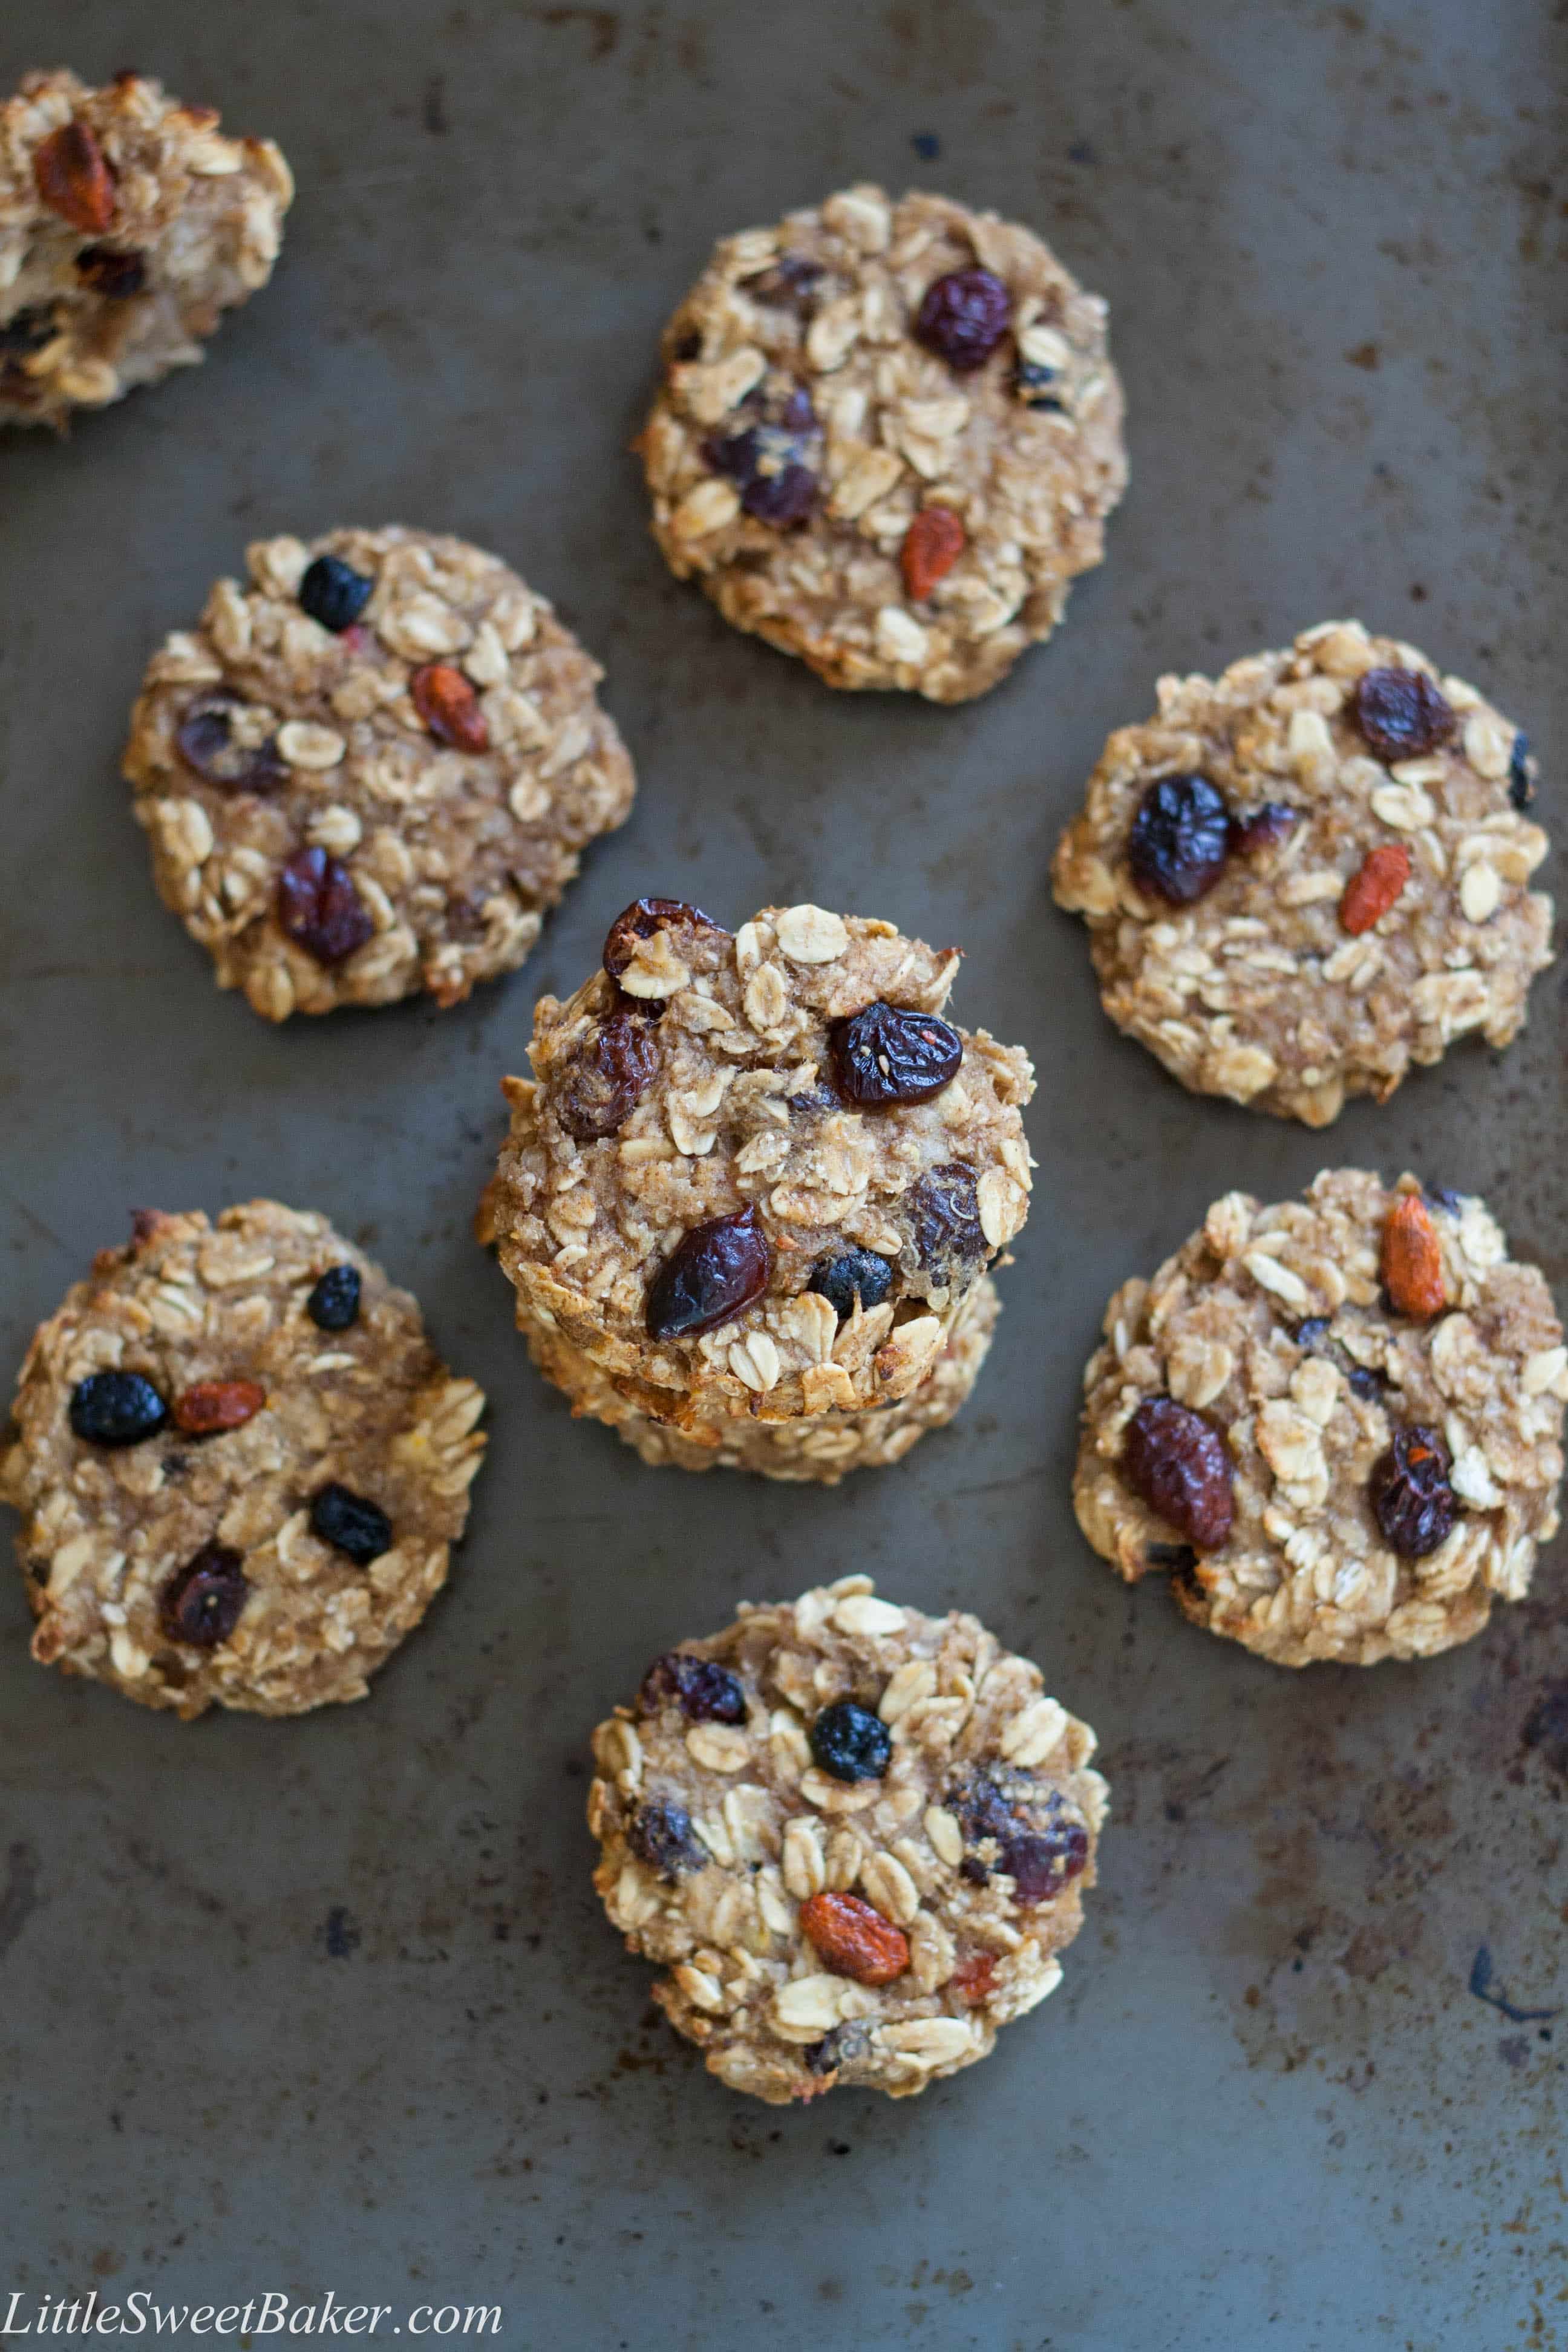 HEALTHY BANANA OATMEAL COOKIES. Gluten-free, no sugar, no fat, easy to make, healthy and delicious. Great for breakfast, school lunches and/or as a snack.